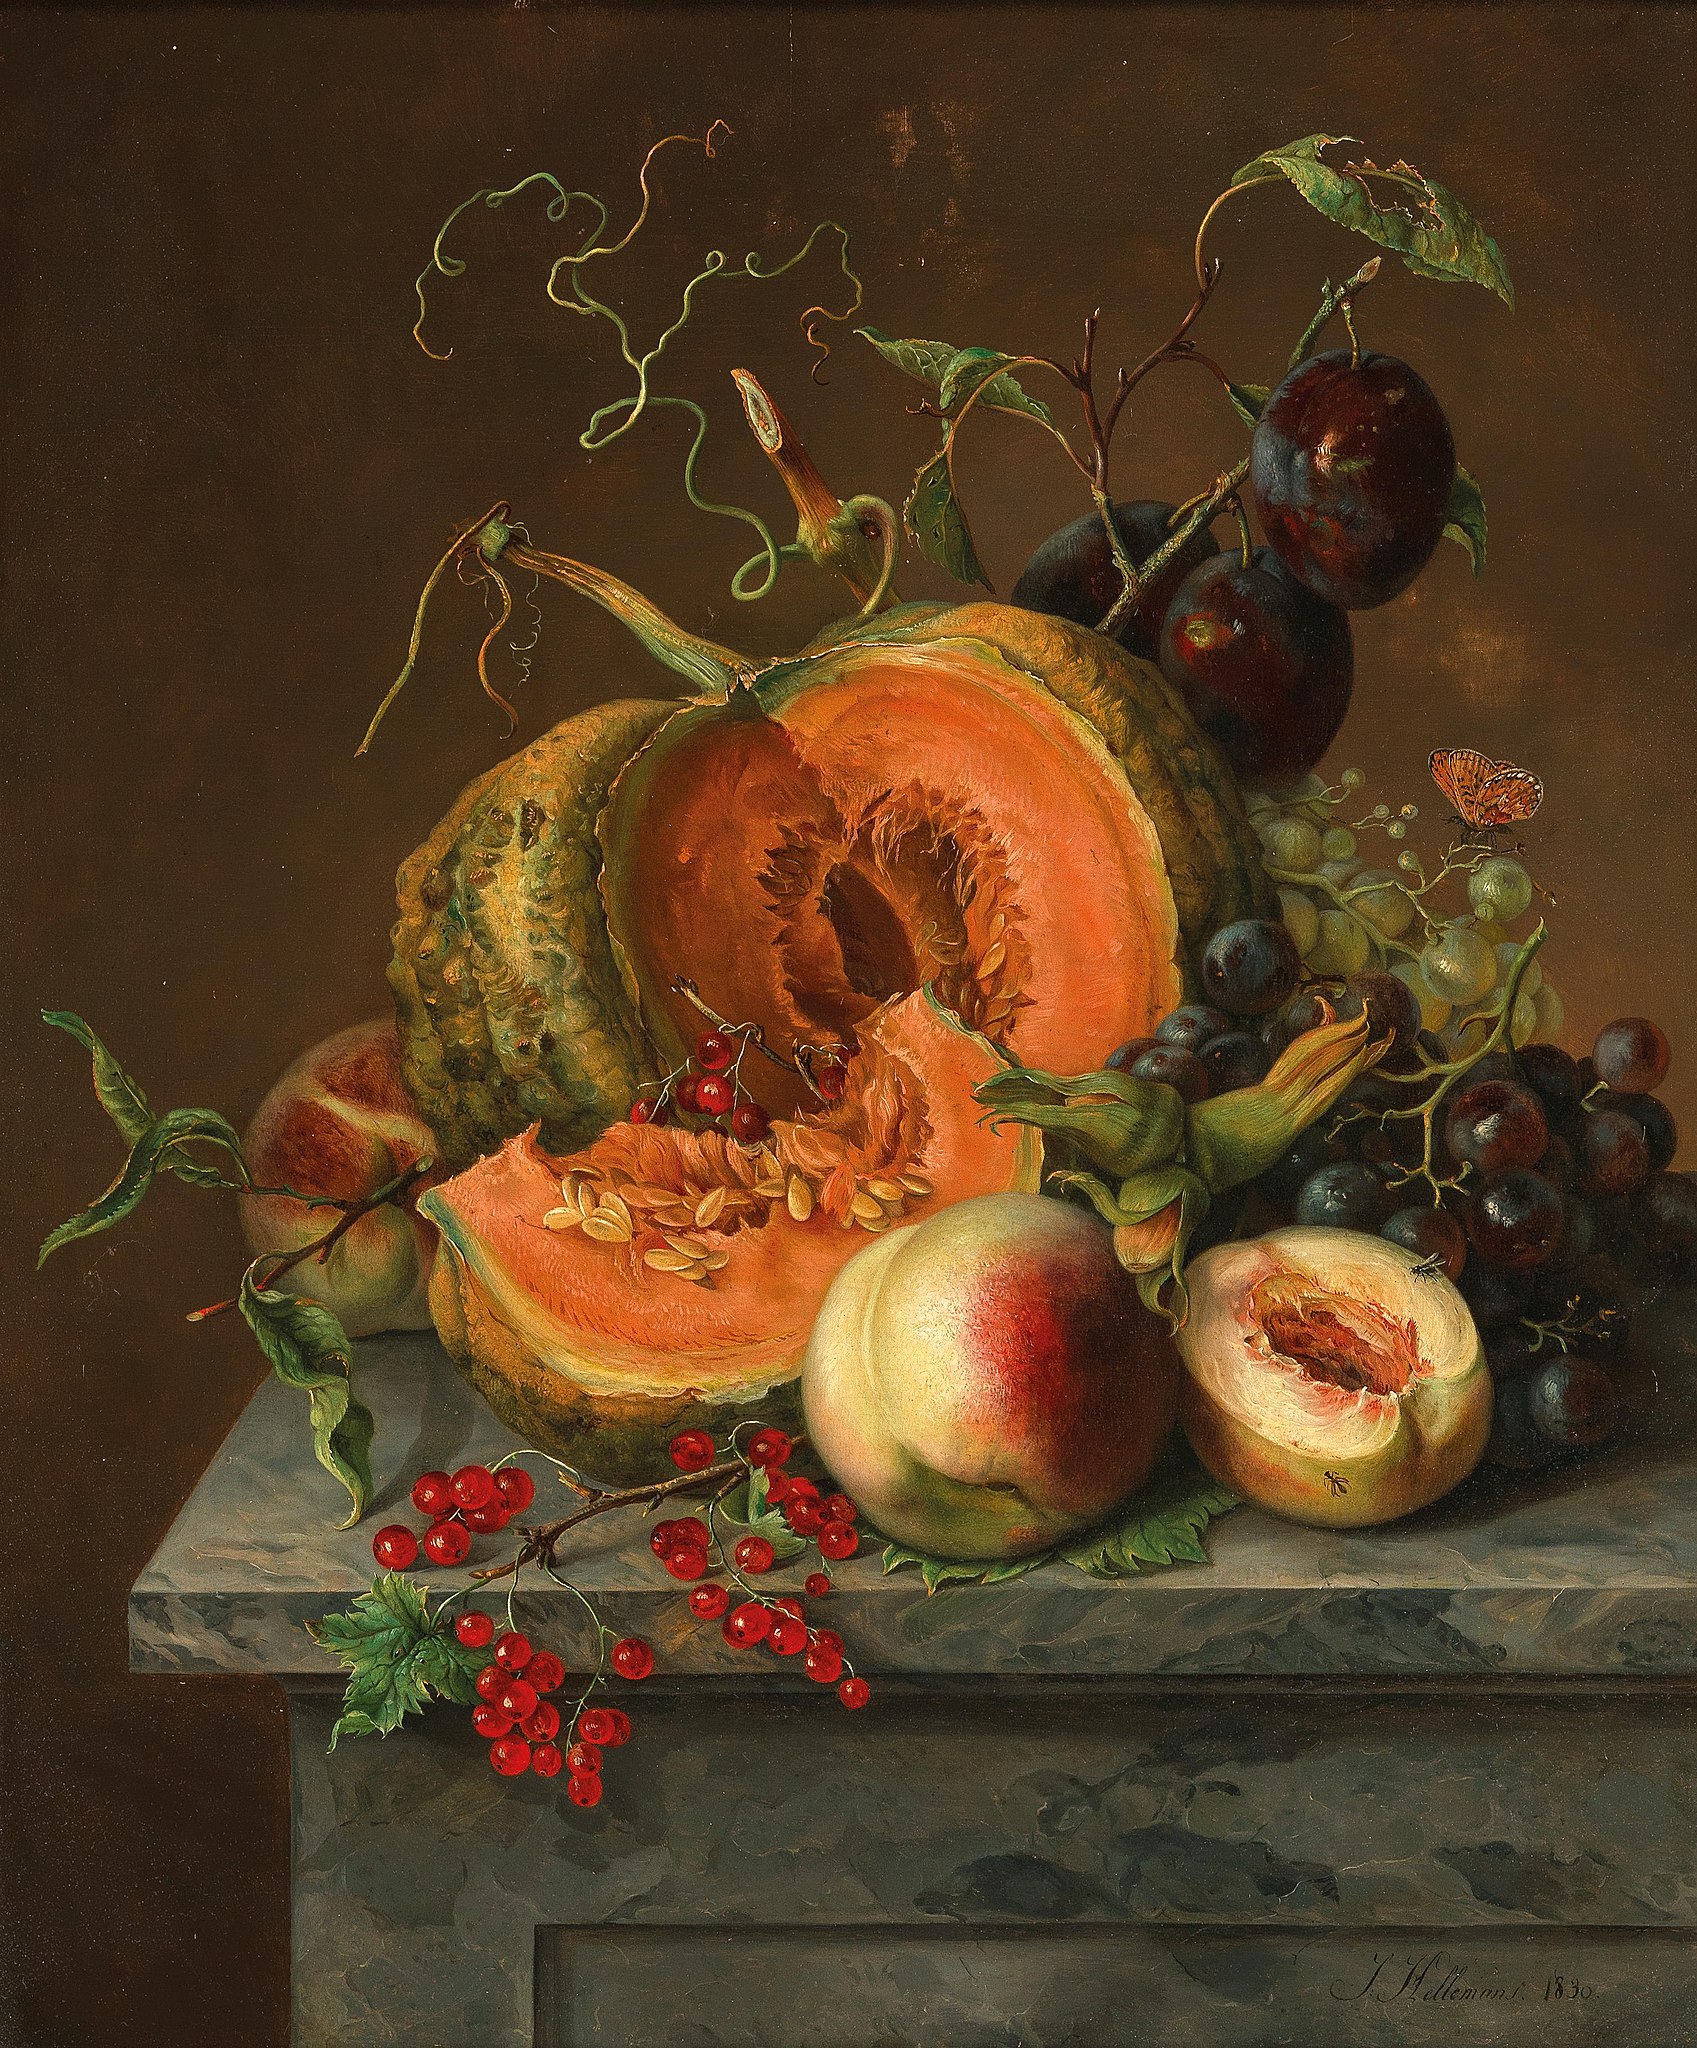 Still Life With Fruit and Pumpkin by Jeanne Marie Joséphine Hellemans - 1830 - 51,5 x 42 cm private collection